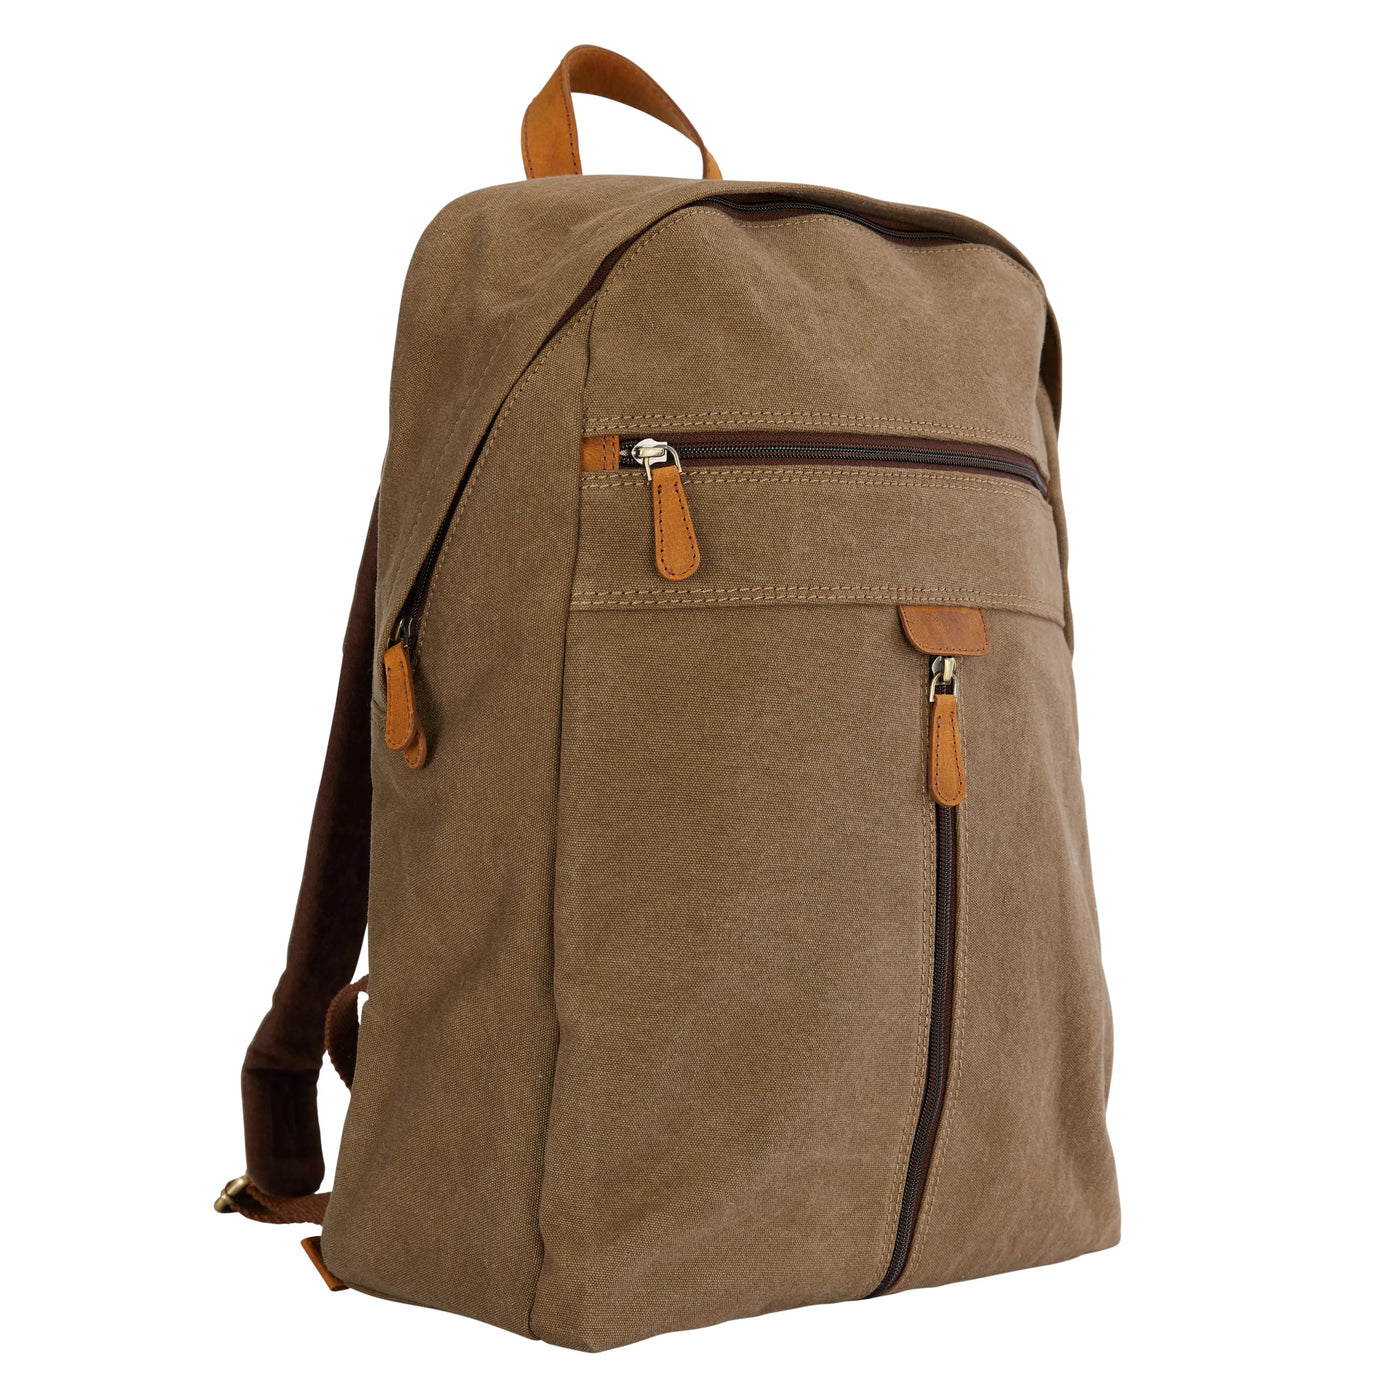 Noricum Canvas and Leather Rucksack in Khaki or Brown